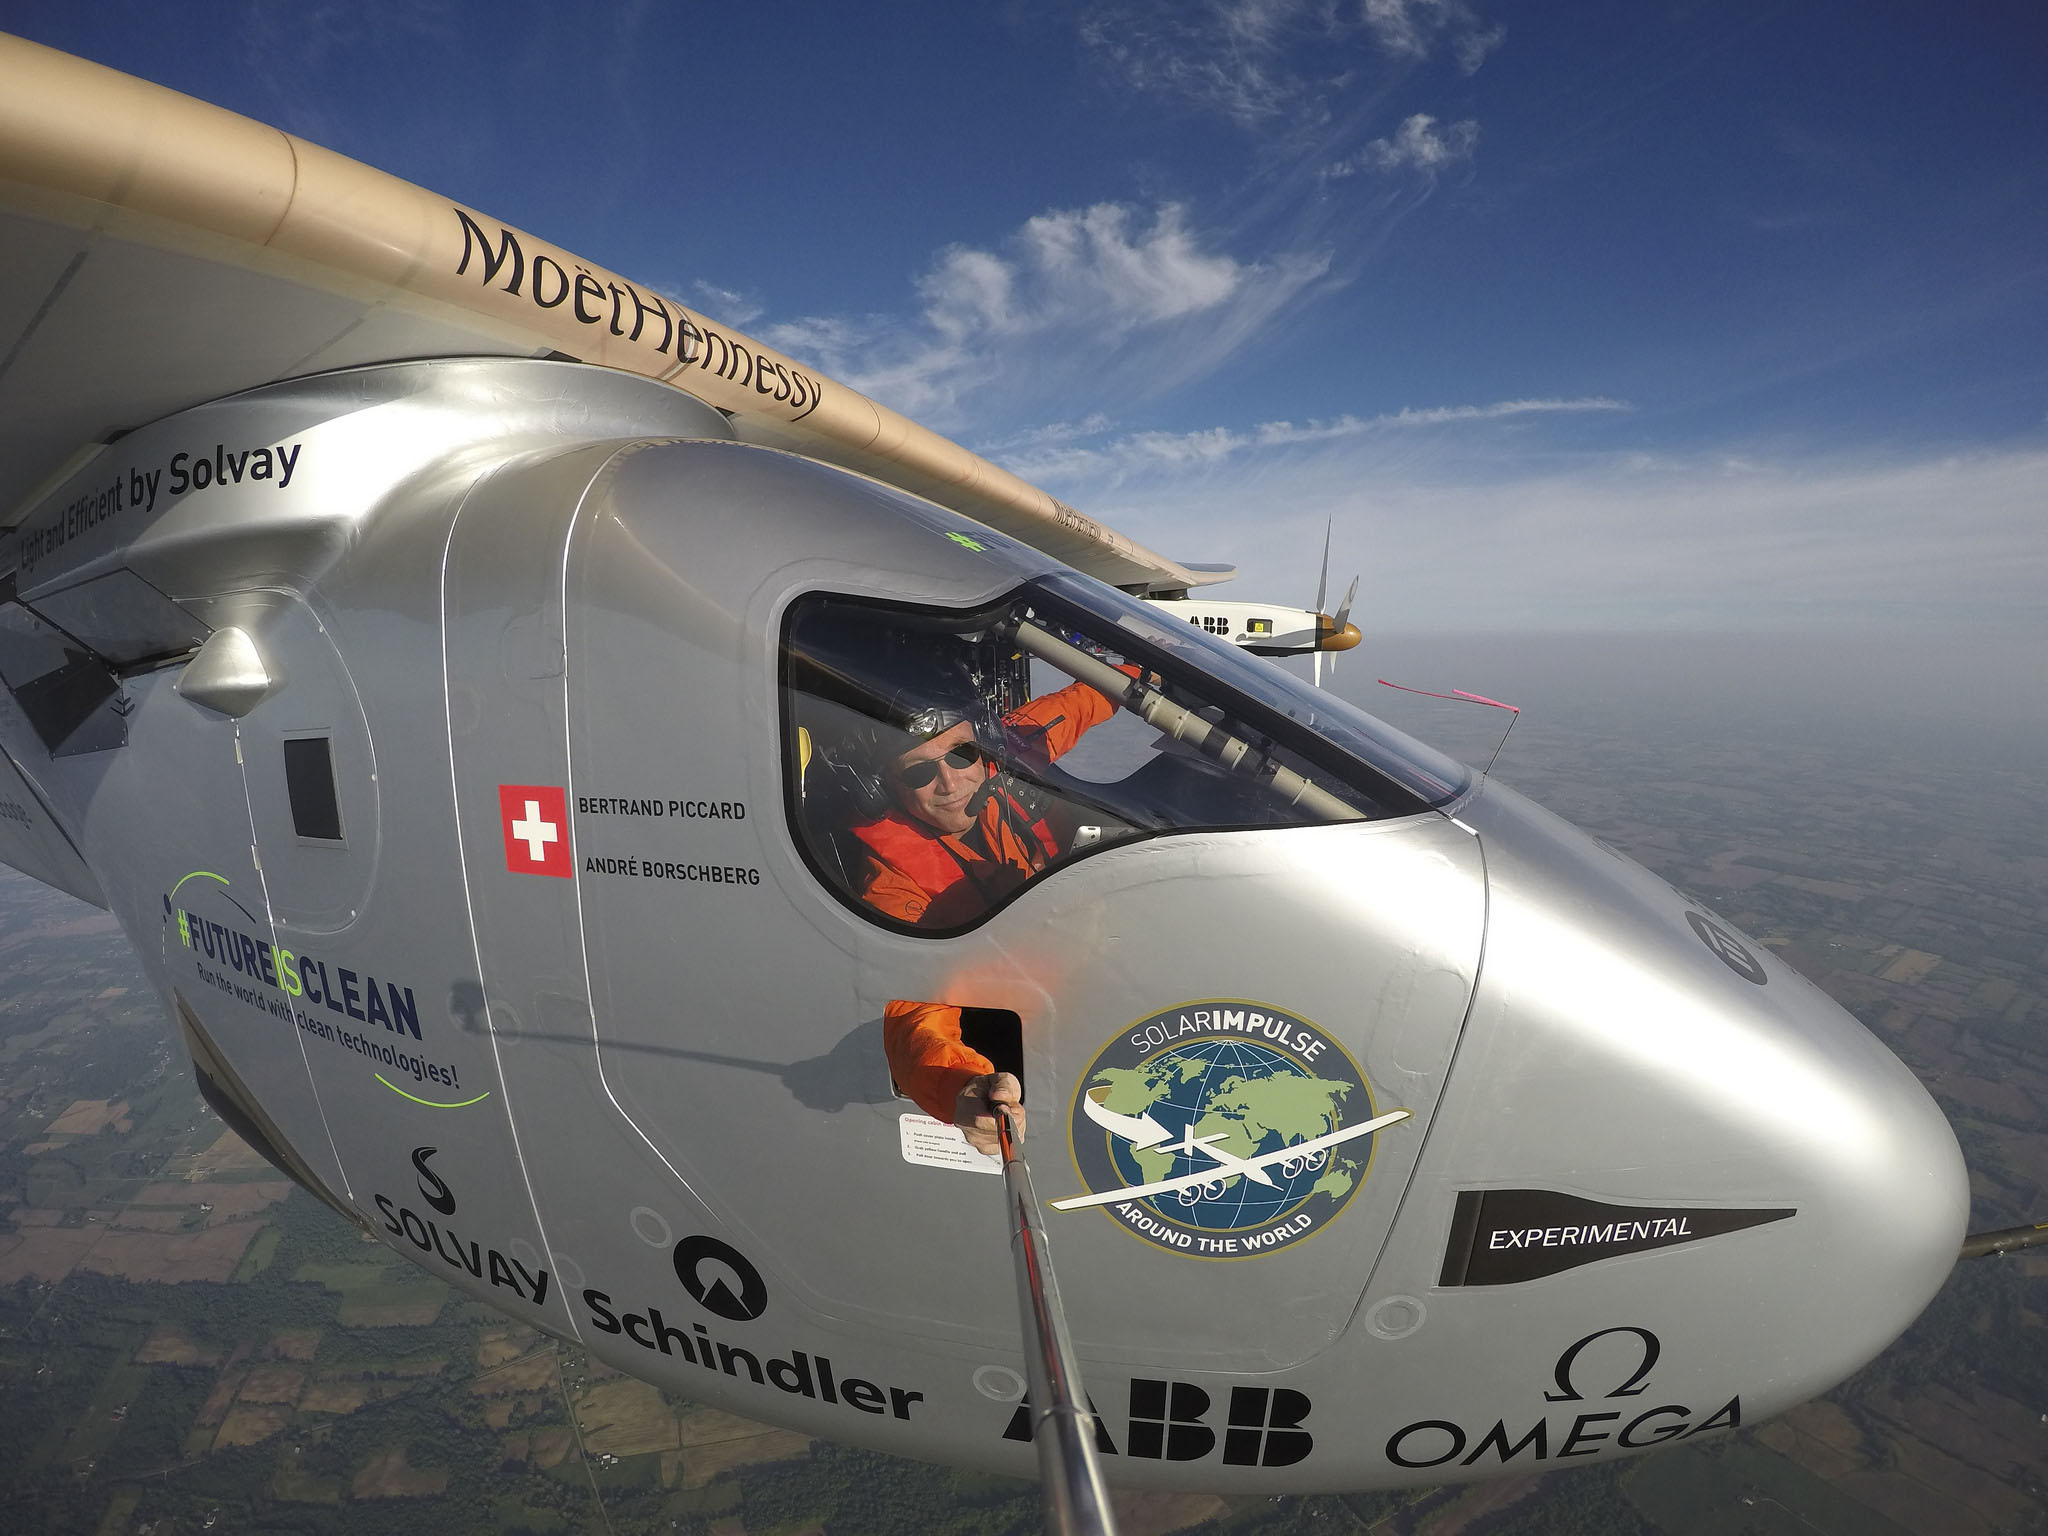 Bertrand Piccard takes a selfie during his flight from Dayton, Ohio to Allentown, Pennsylvania May 25. Photo courtesy of Solar Impulse.